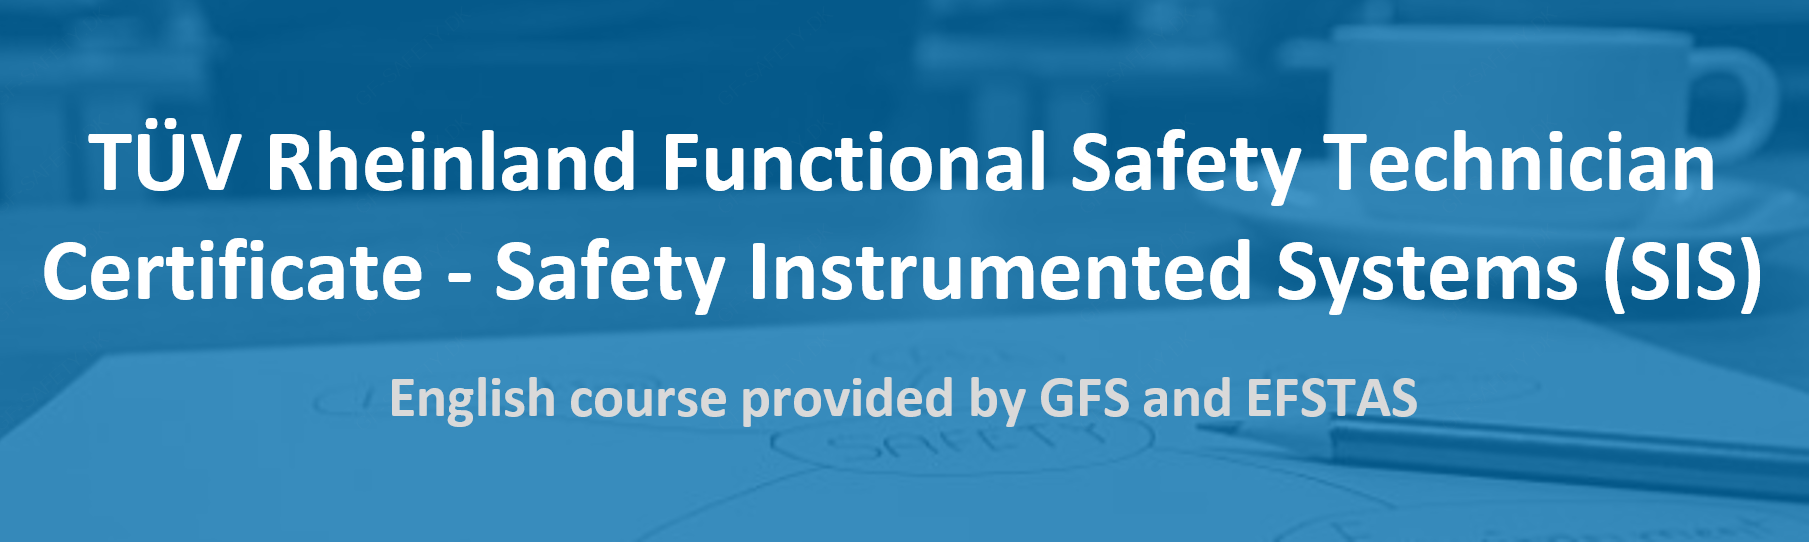 TÜV Rheinland Functional Safety Technician Certificate - Safety Instrumented Systems (SIS)